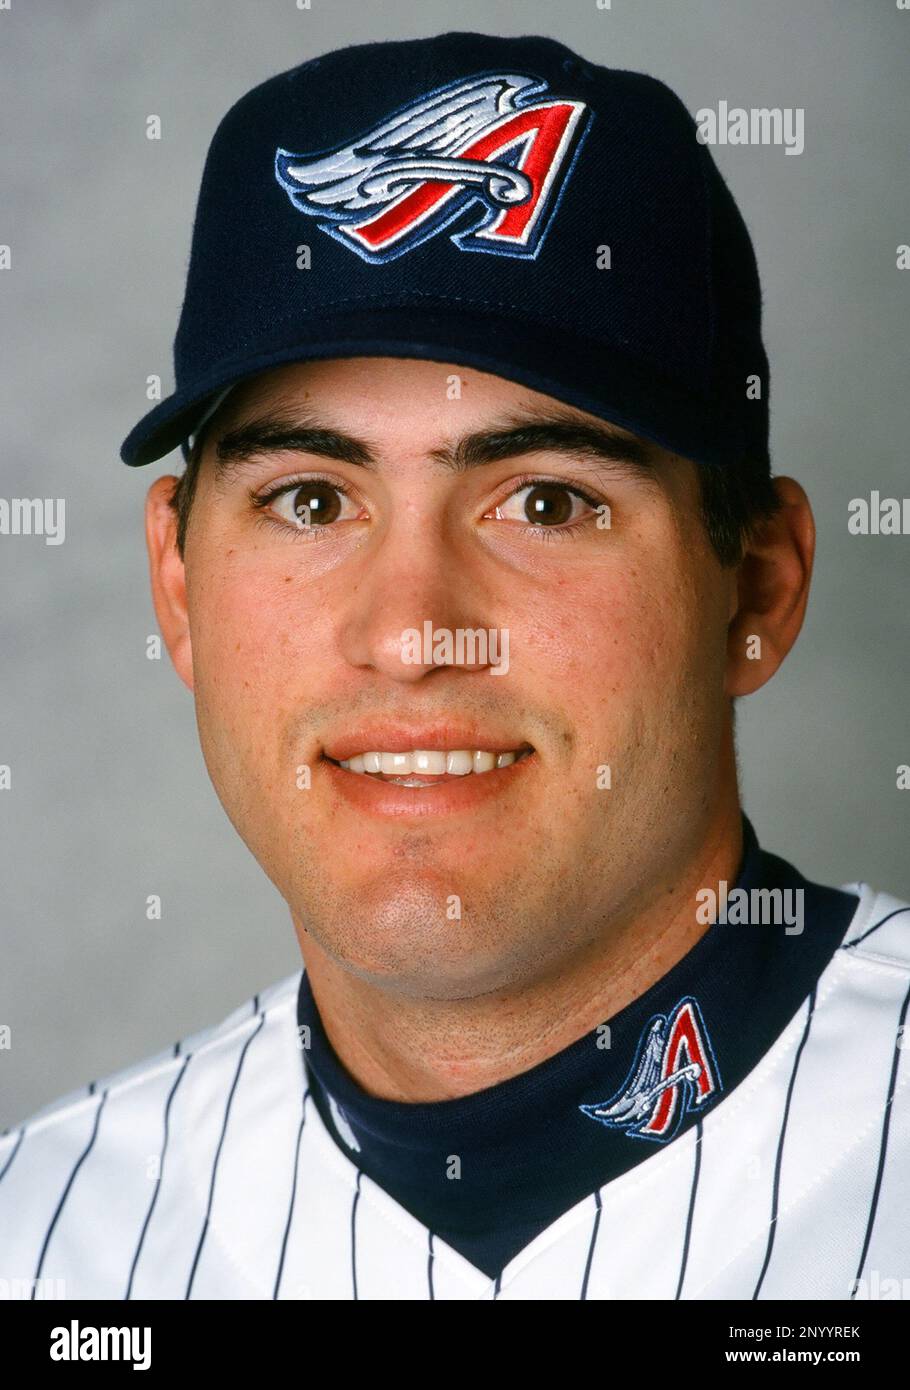 23 Feb. 1998: Anaheim Angels infielder Phil Nevin (20) posses for a  photograph during Angels team photo day at Tempe Diablo Stadium in Tempe  Arizona. (Photo By John Cordes/Icon Sportswire) (Icon Sportswire